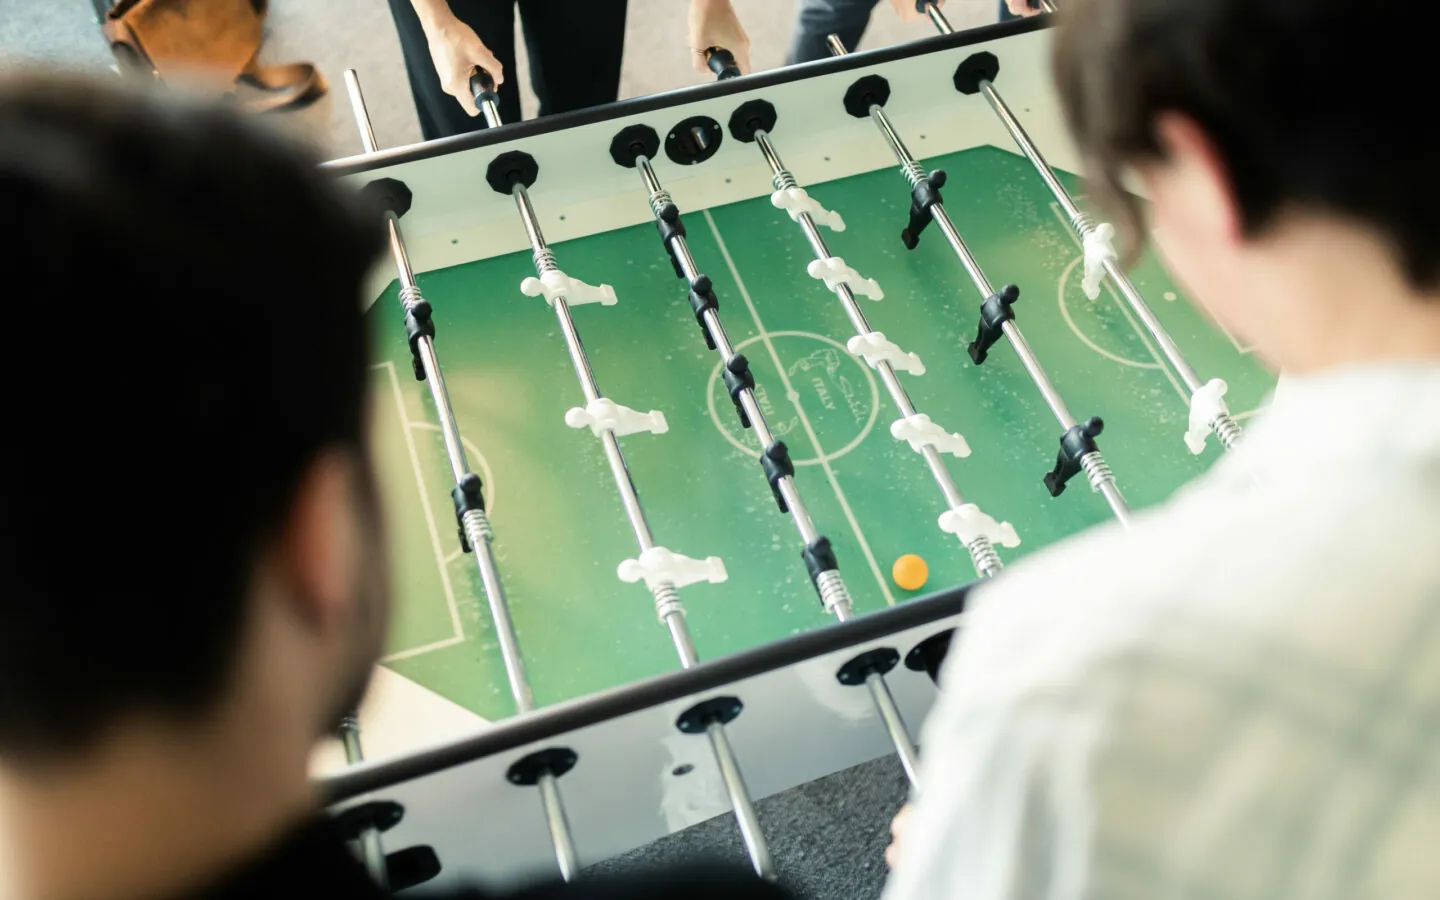 Foosball table, photographed from diagonally above, at which four valantic CX employees are playing.